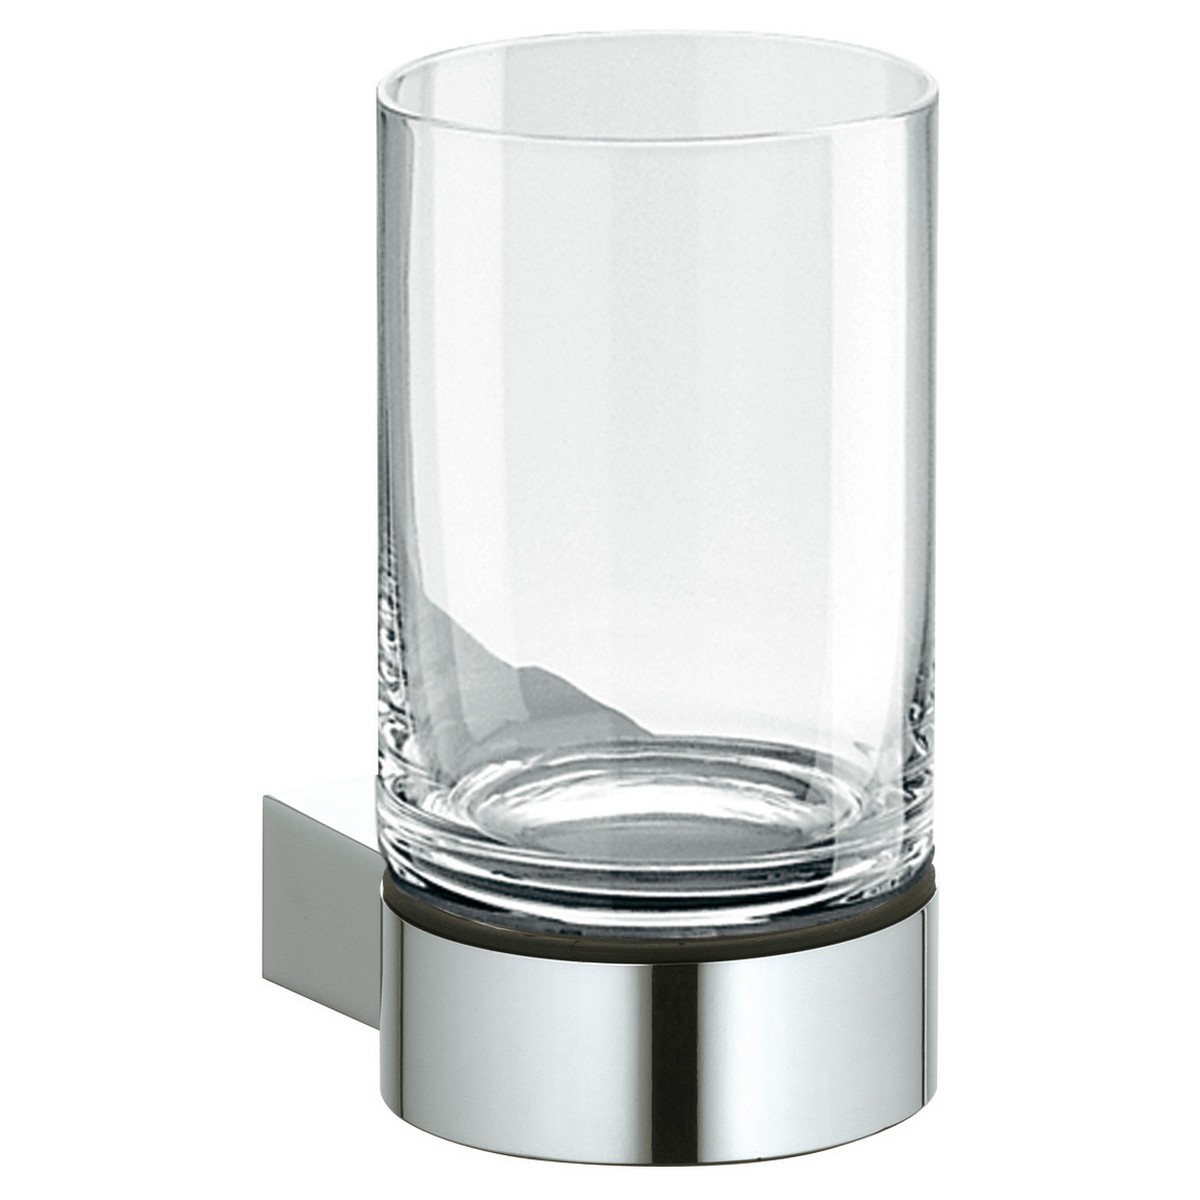 KEUCO 14950010100 PLAN 2 5/8 INCH WALL MOUNTED ACRYLIC TUMBLER HOLDER IN POLISHED CHROME